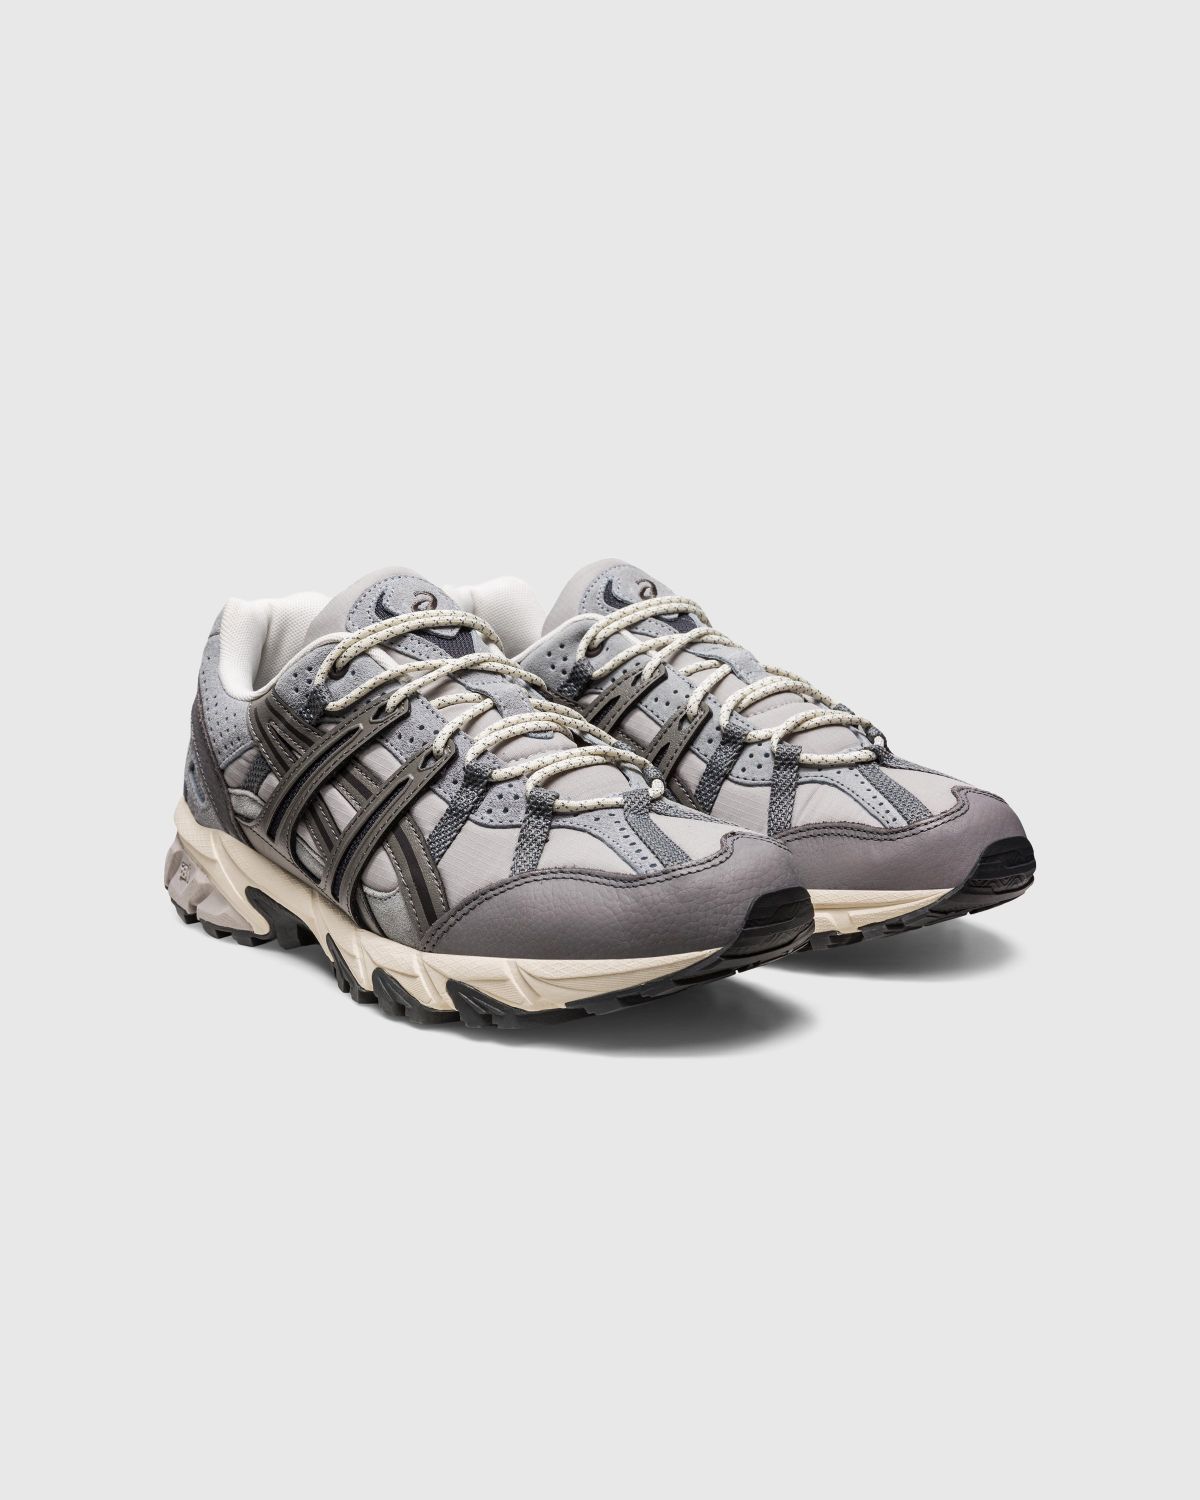 asics – GEL-SONOMA 15-50 Oyster Grey/Clay Grey - Sneakers - Grey - Image 3